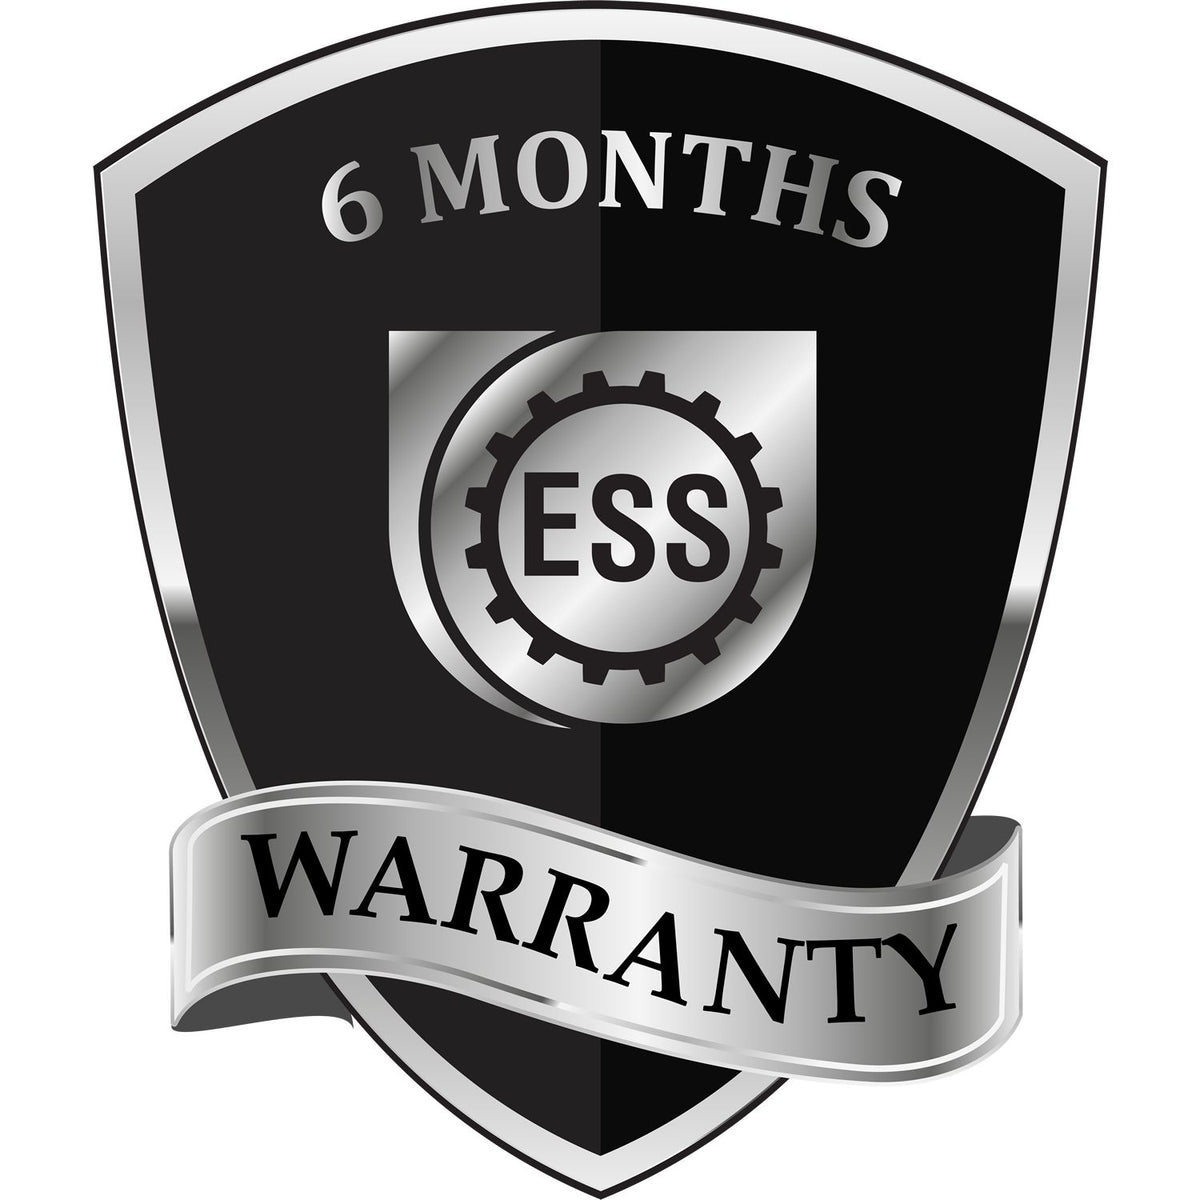 A black and silver badge or emblem showing warranty information for the Texas Professional Geologist Seal Stamp